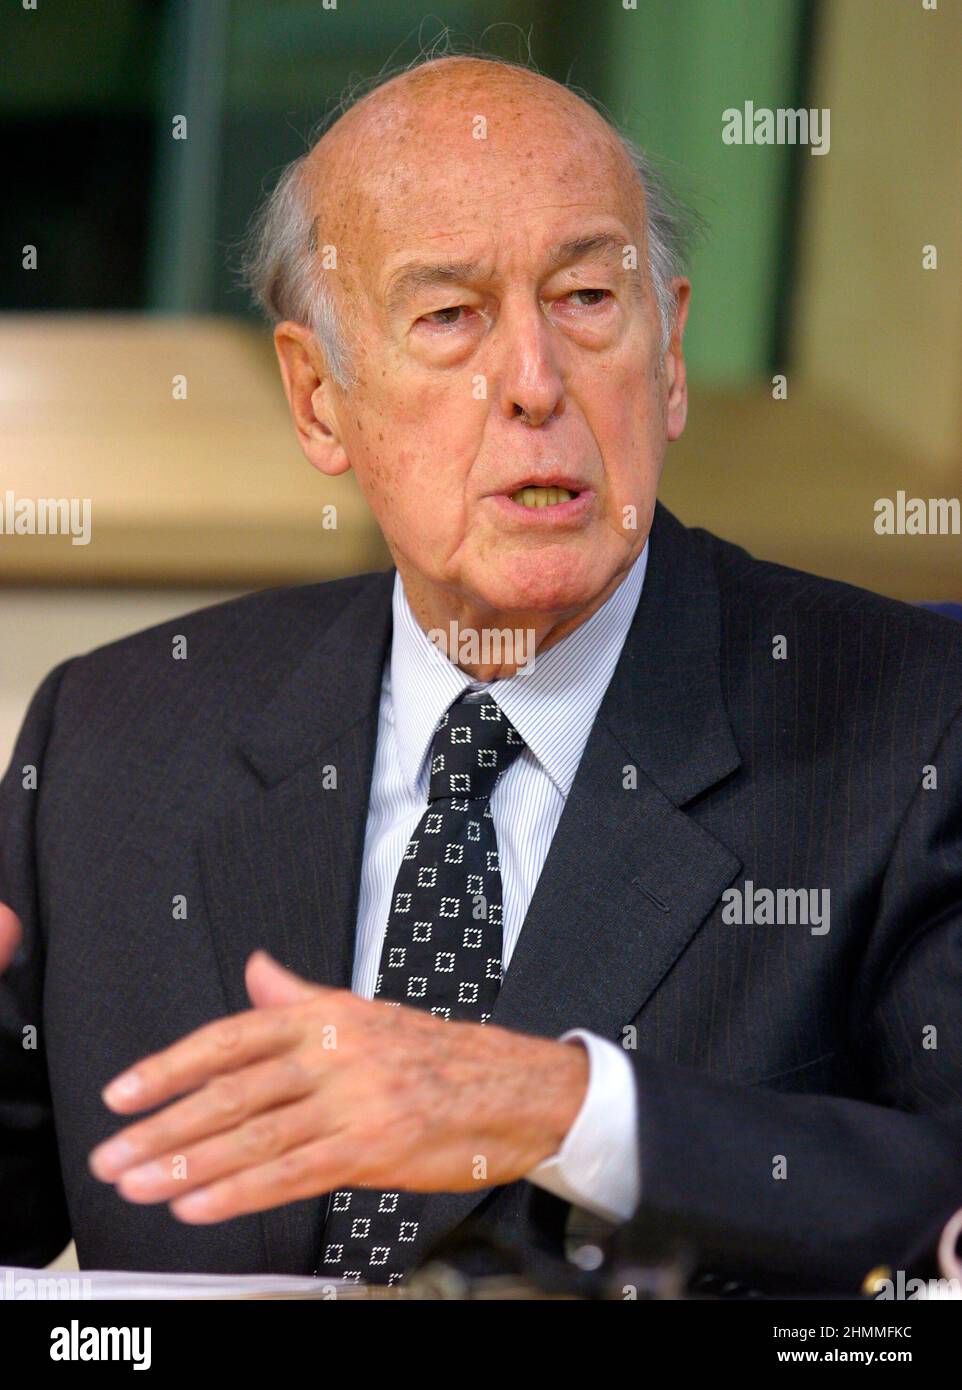 Belgium, Brussels, on June 6, 2003: Valry Giscard d'Estaing, President of the European Convention, attending a Conference on the Future of Europe where a Treaty Establishing a Constitution for Europe was to be agreed. Valry Giscard d'Estaing, European Convention President Stock Photo